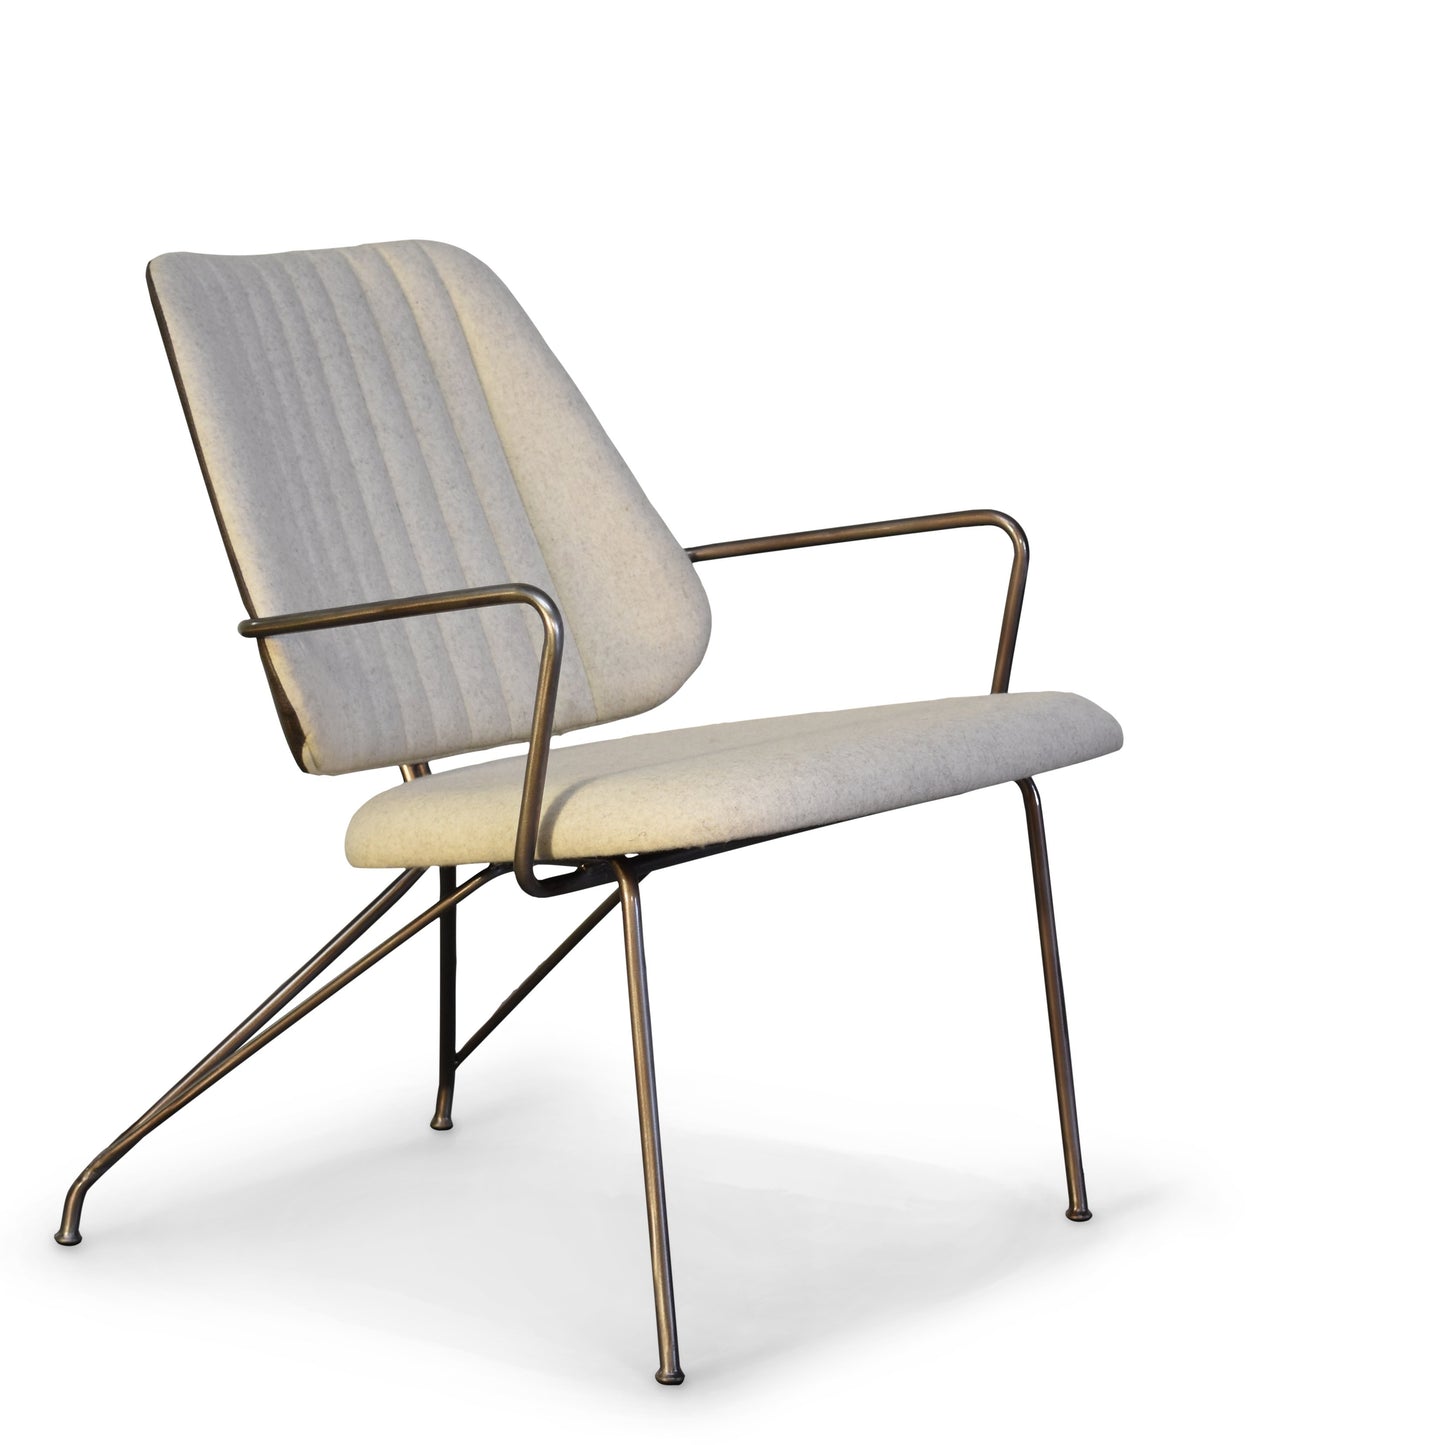 Load image into Gallery viewer, Taylor Contemporary Lounge Chair Ivory/Pewter Gingko Furniture  Ivory/Pewter   Four Hands, Burke Decor, Mid Century Modern Furniture, Old Bones Furniture Company, Old Bones Co, Modern Mid Century, Designer Furniture, https://www.oldbonesco.com/
